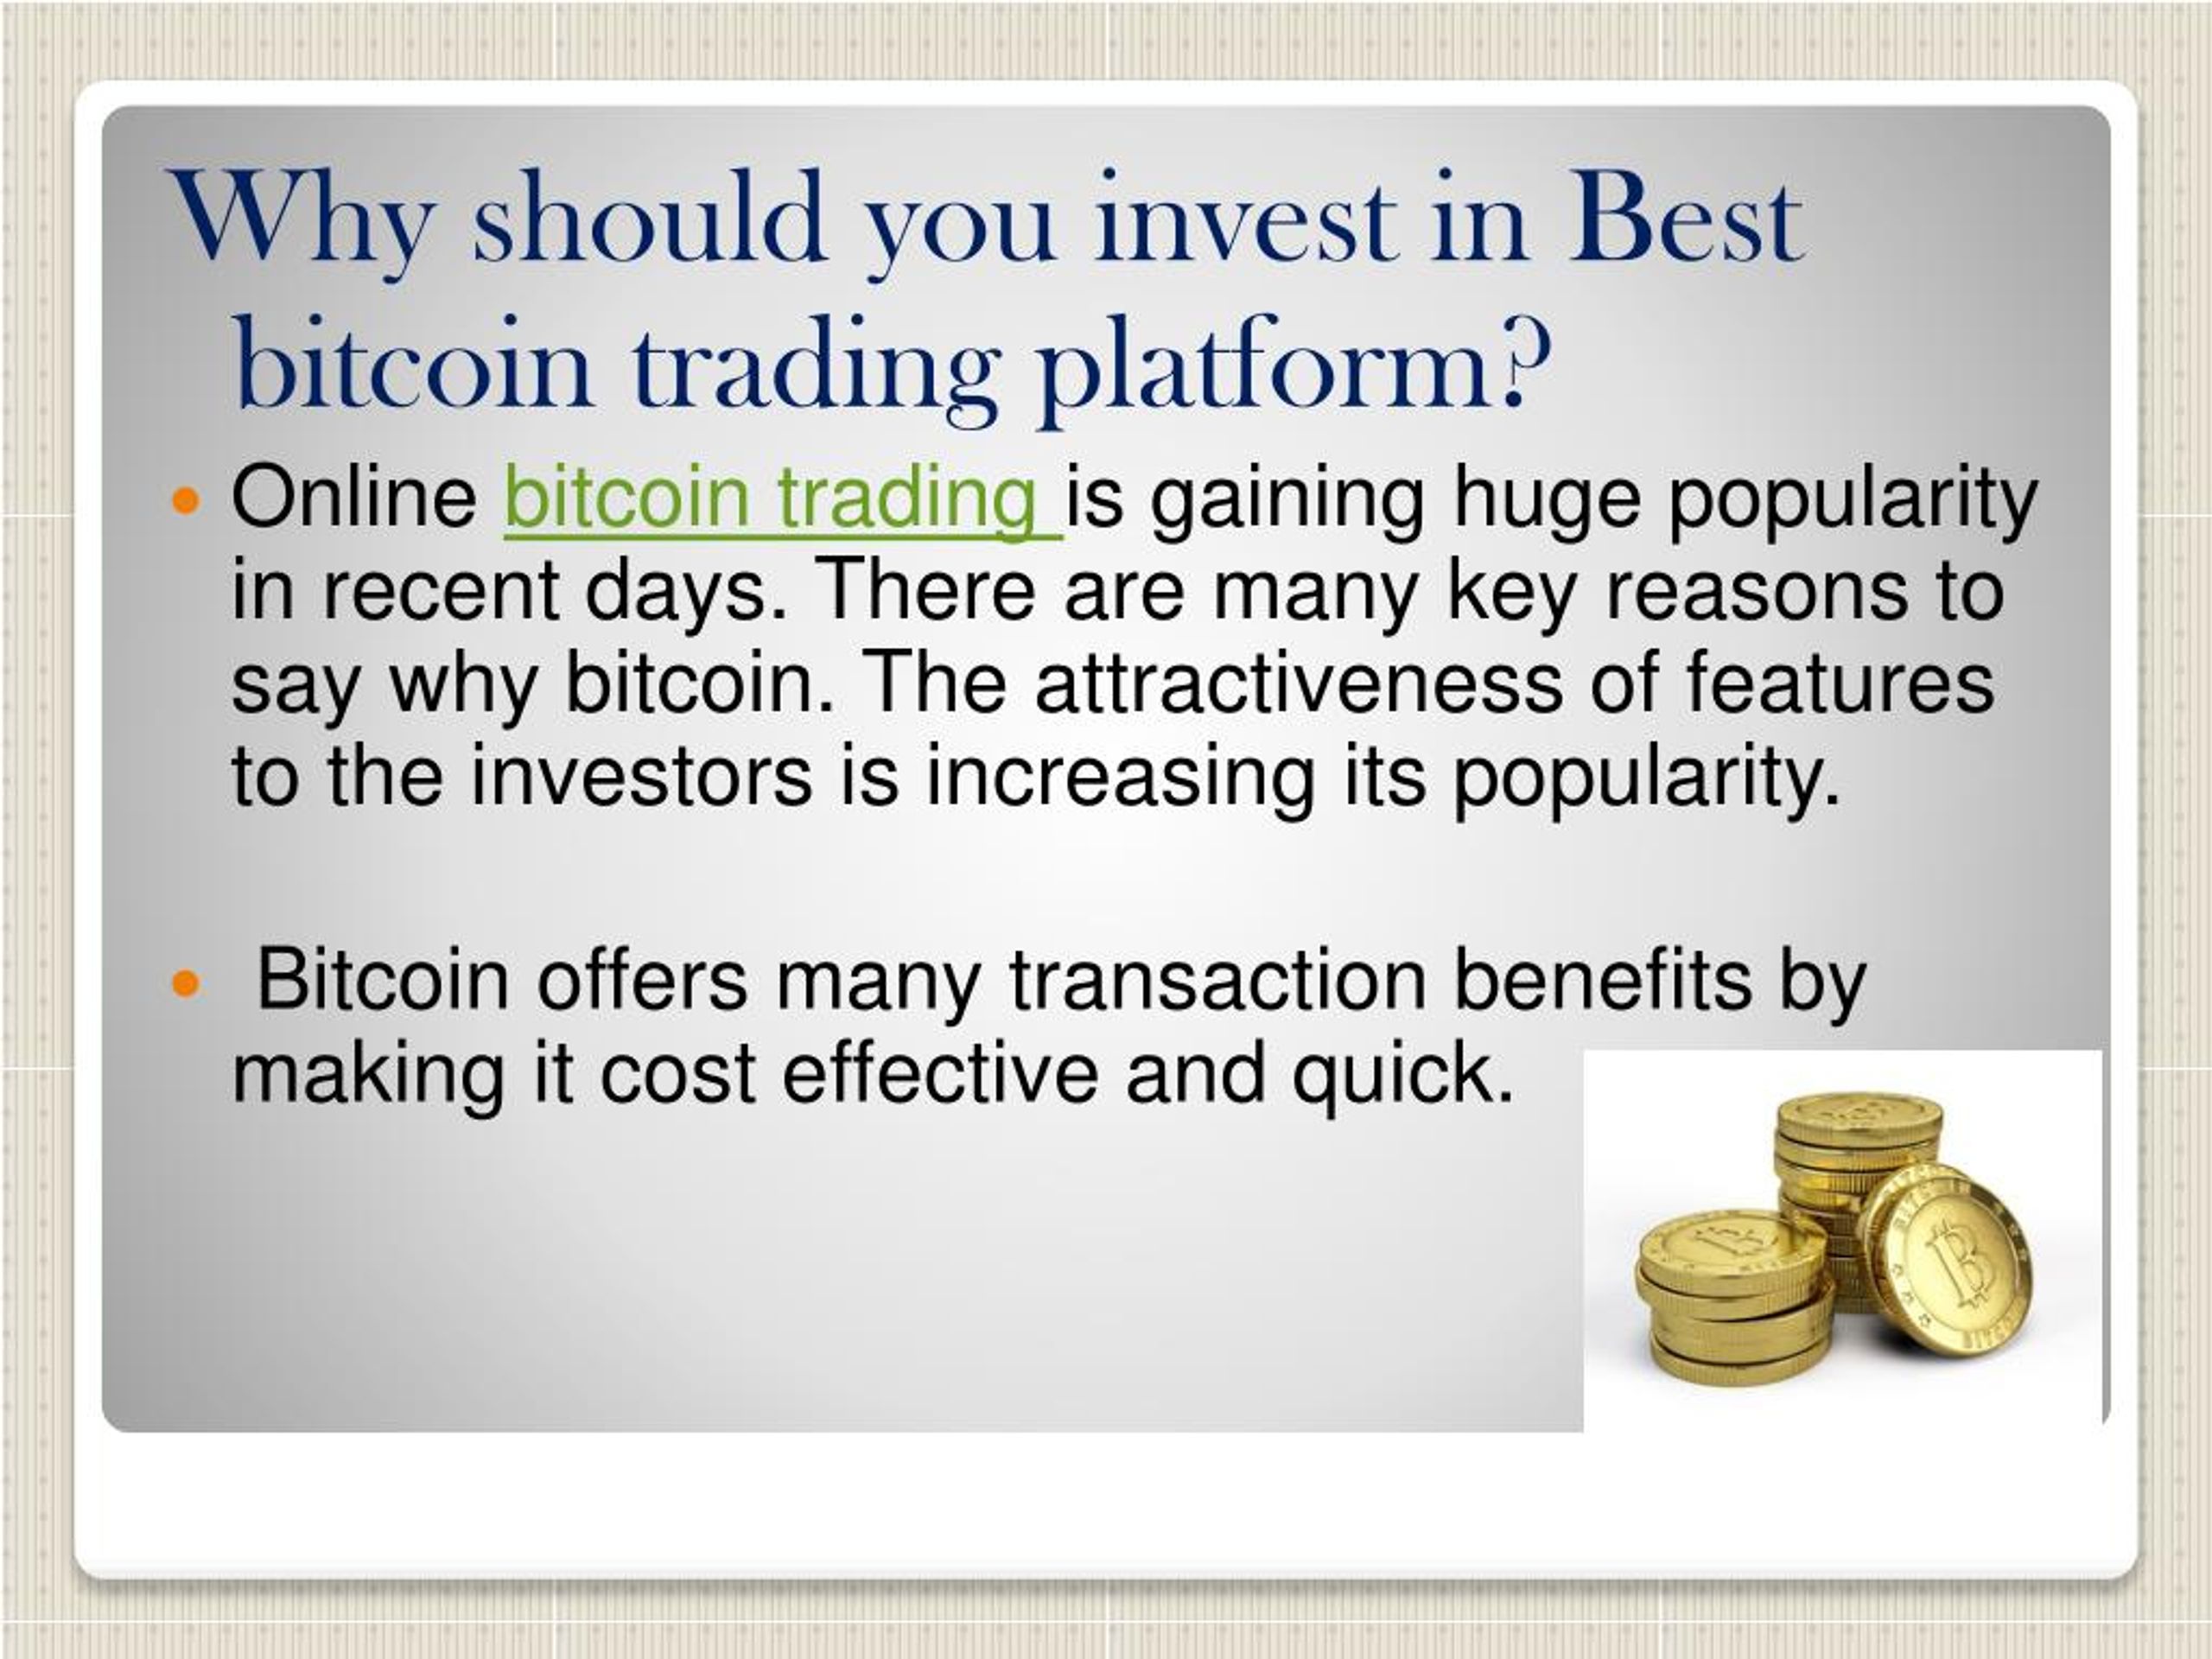 PPT - Why should you invest in Best bitcoin trading ...